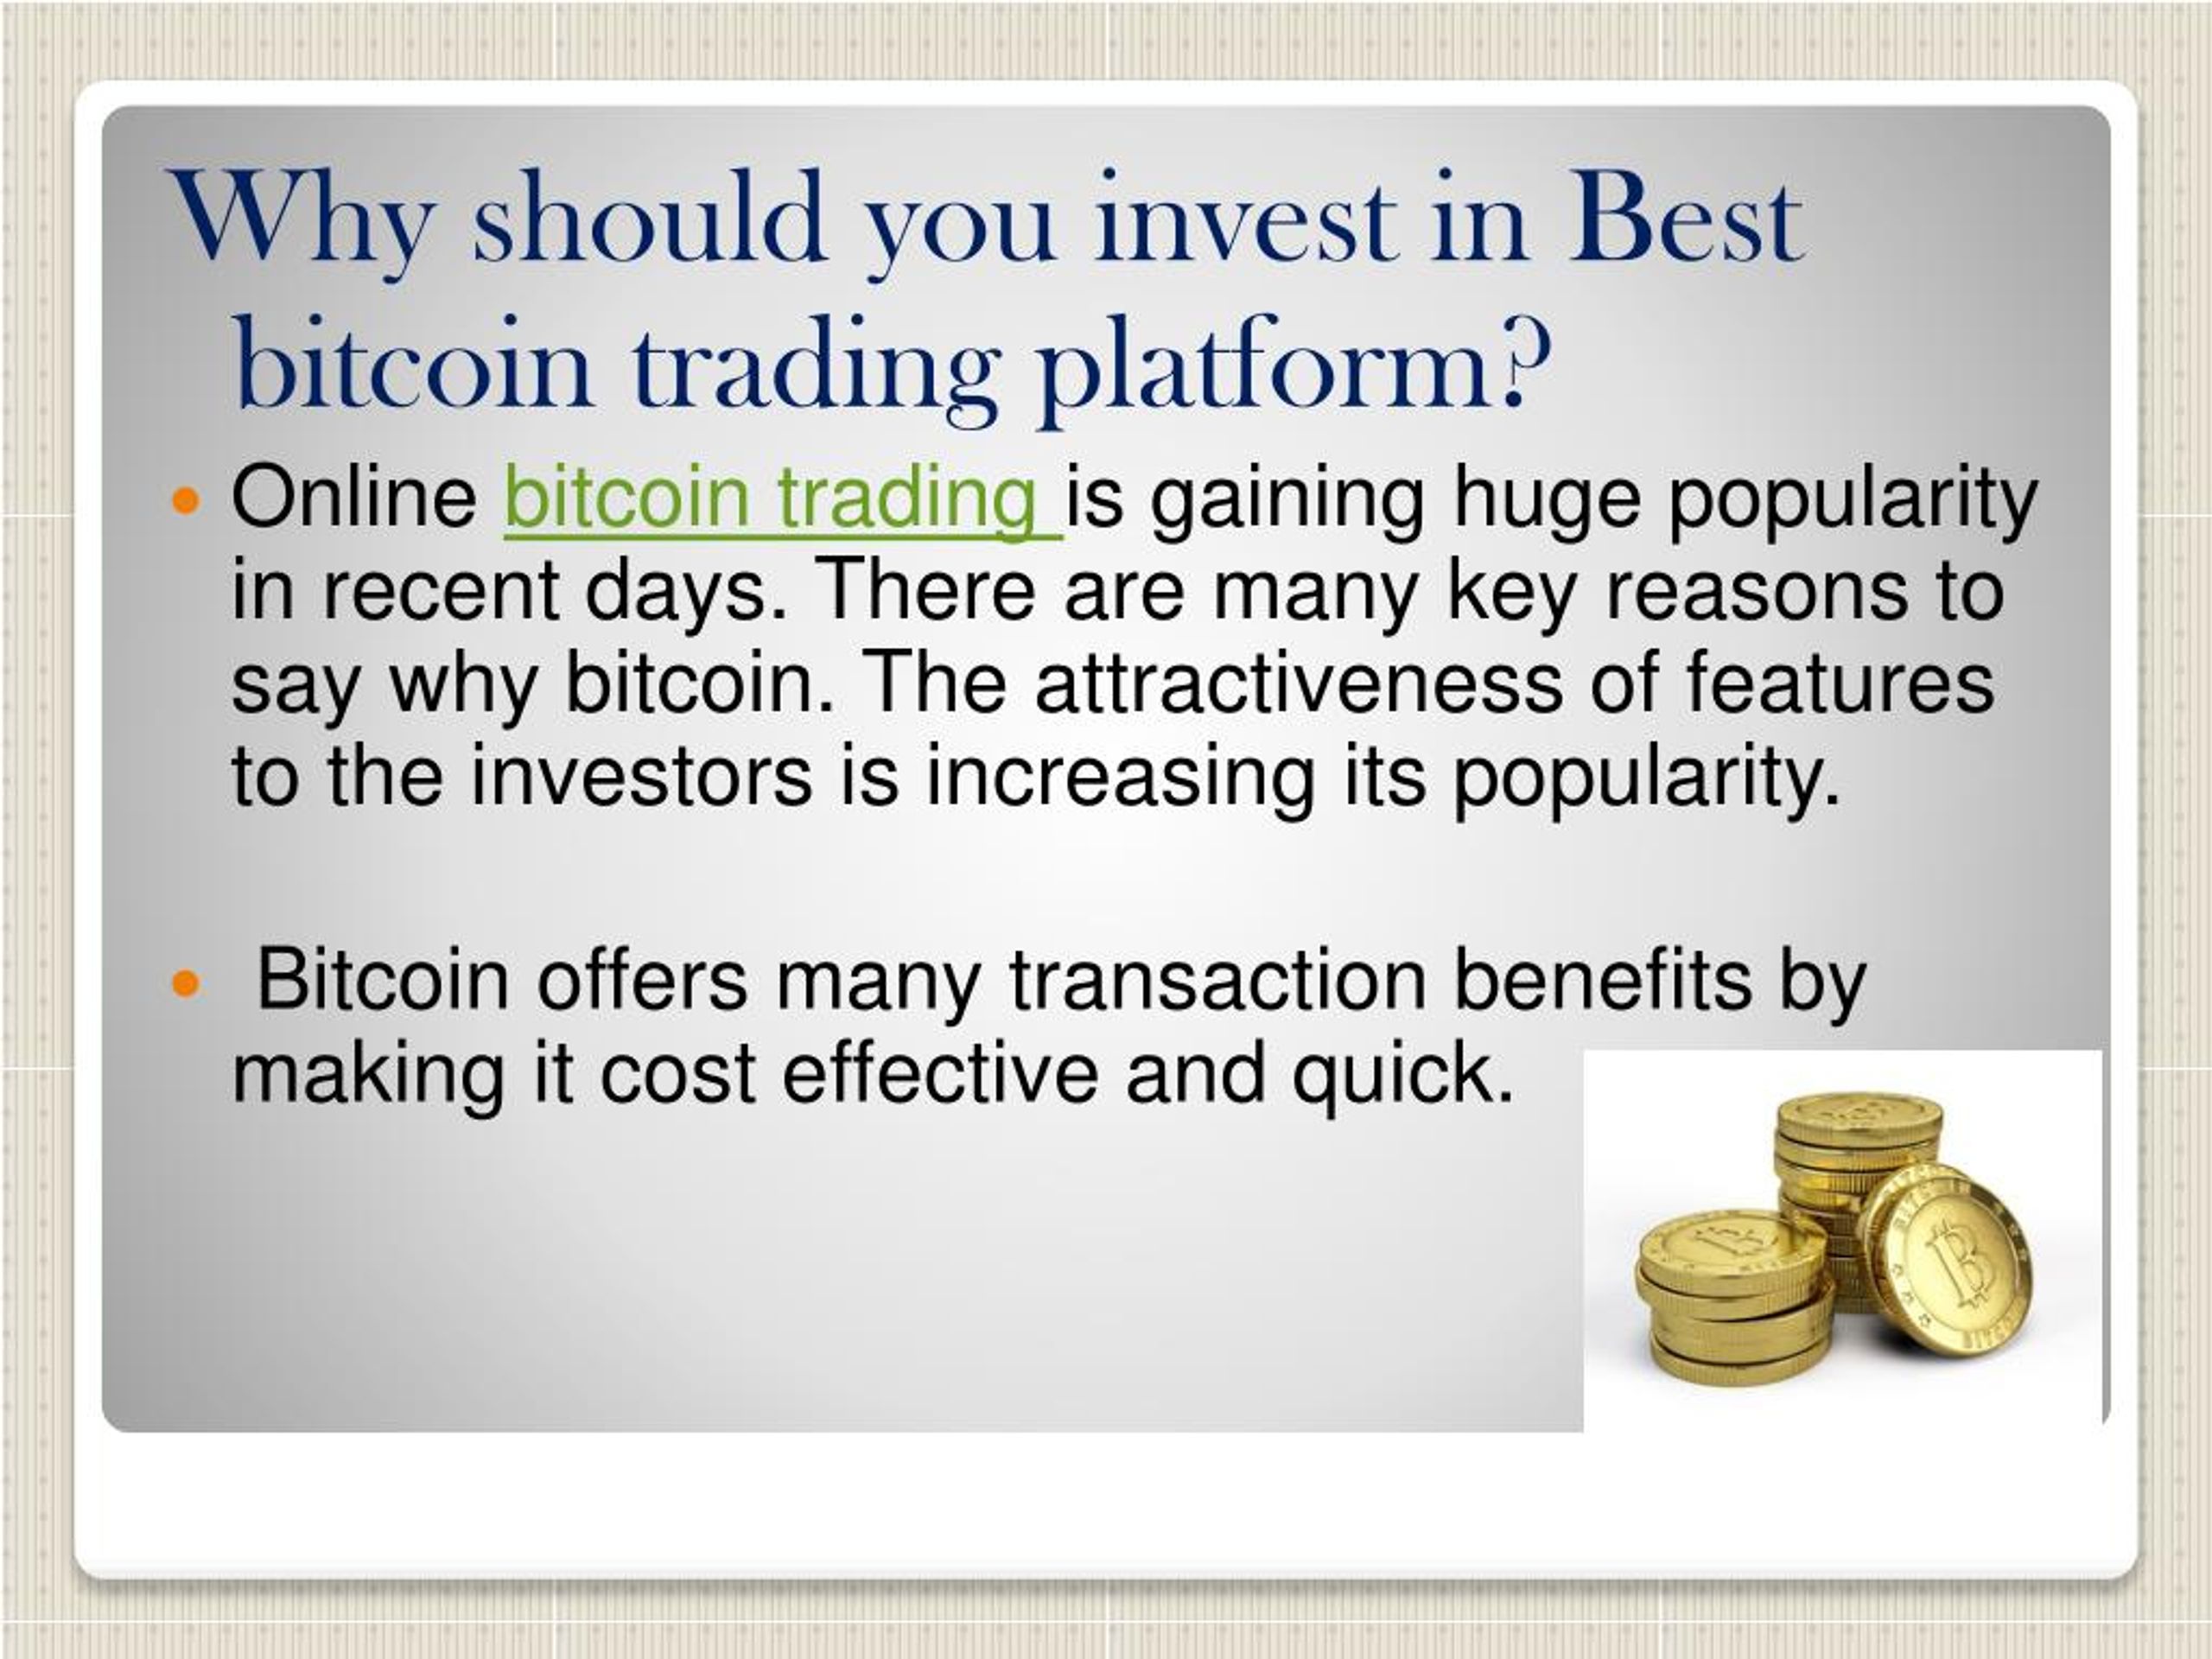 PPT - Why should you invest in Best bitcoin trading ...